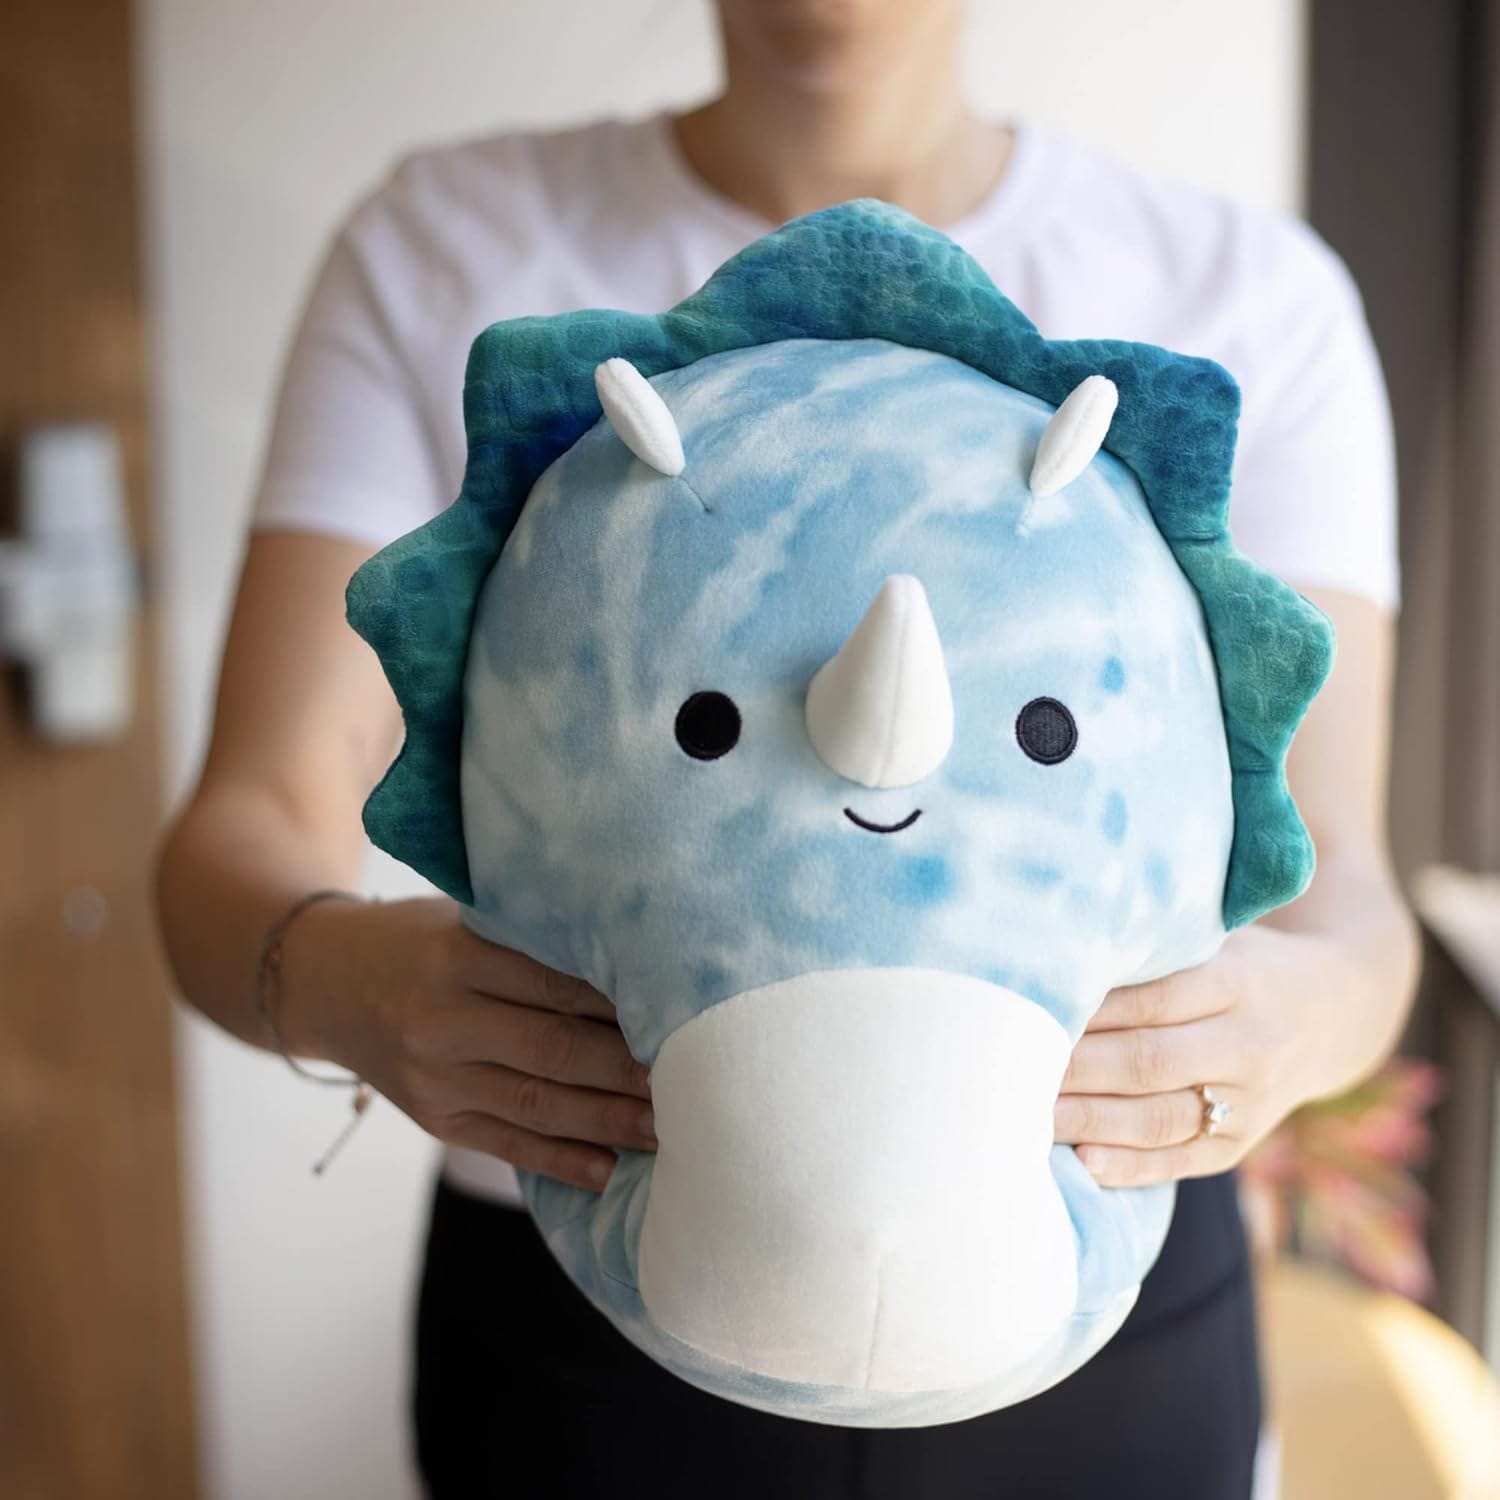 The Dinosaur Squishmallow: Your Prehistoric Cuddle Buddy